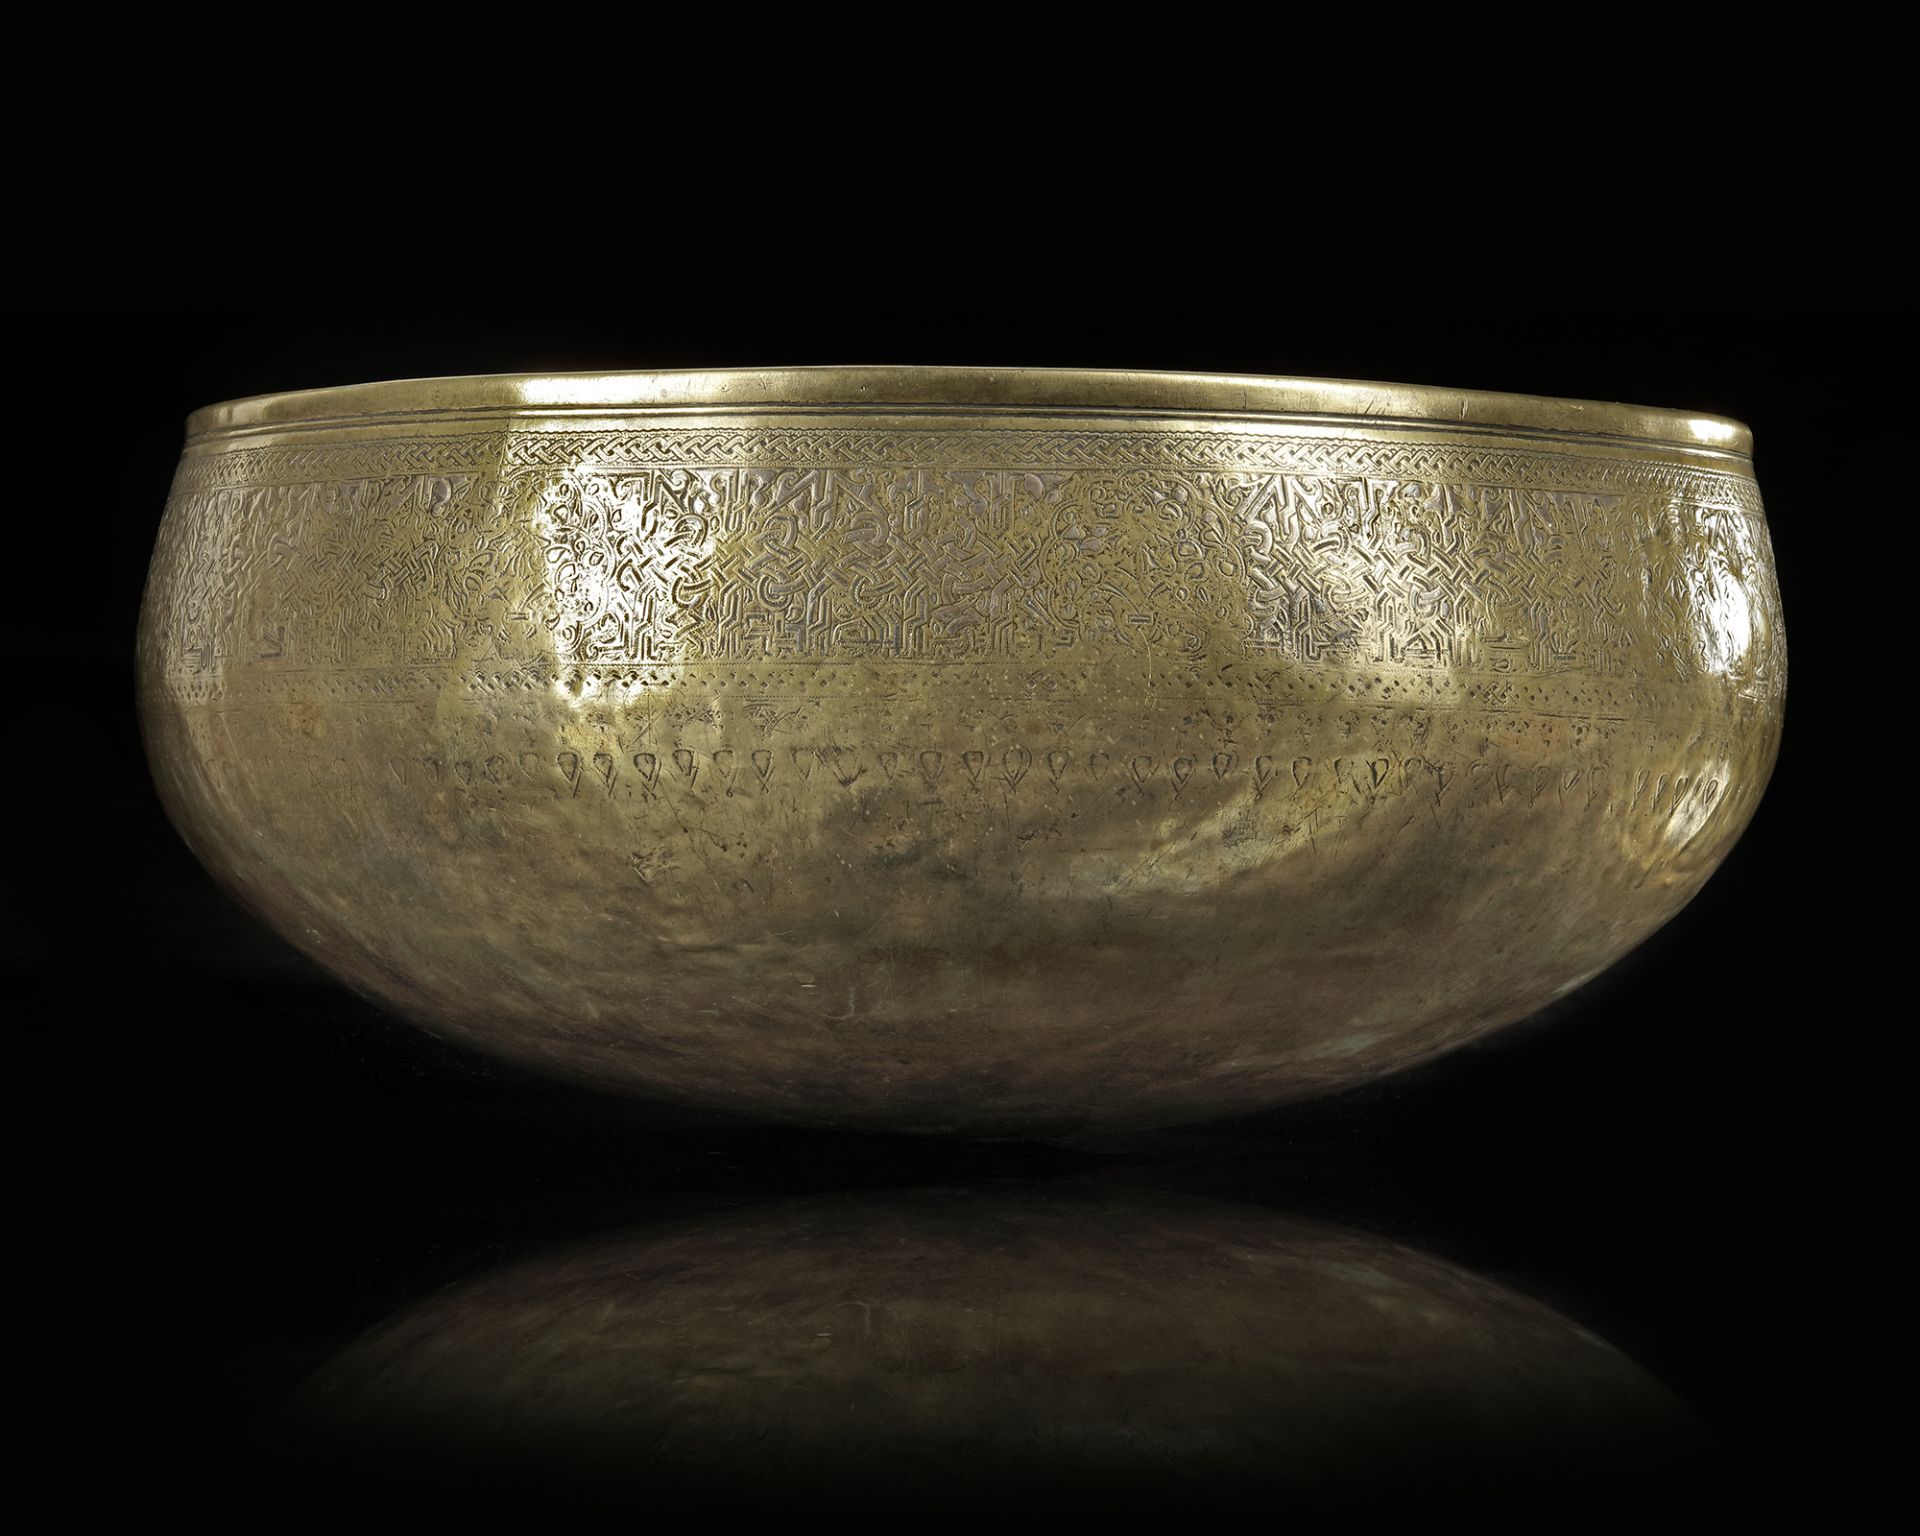 A SILVER INLAID BRASS BOWL, 14TH CENTURY - Image 3 of 10